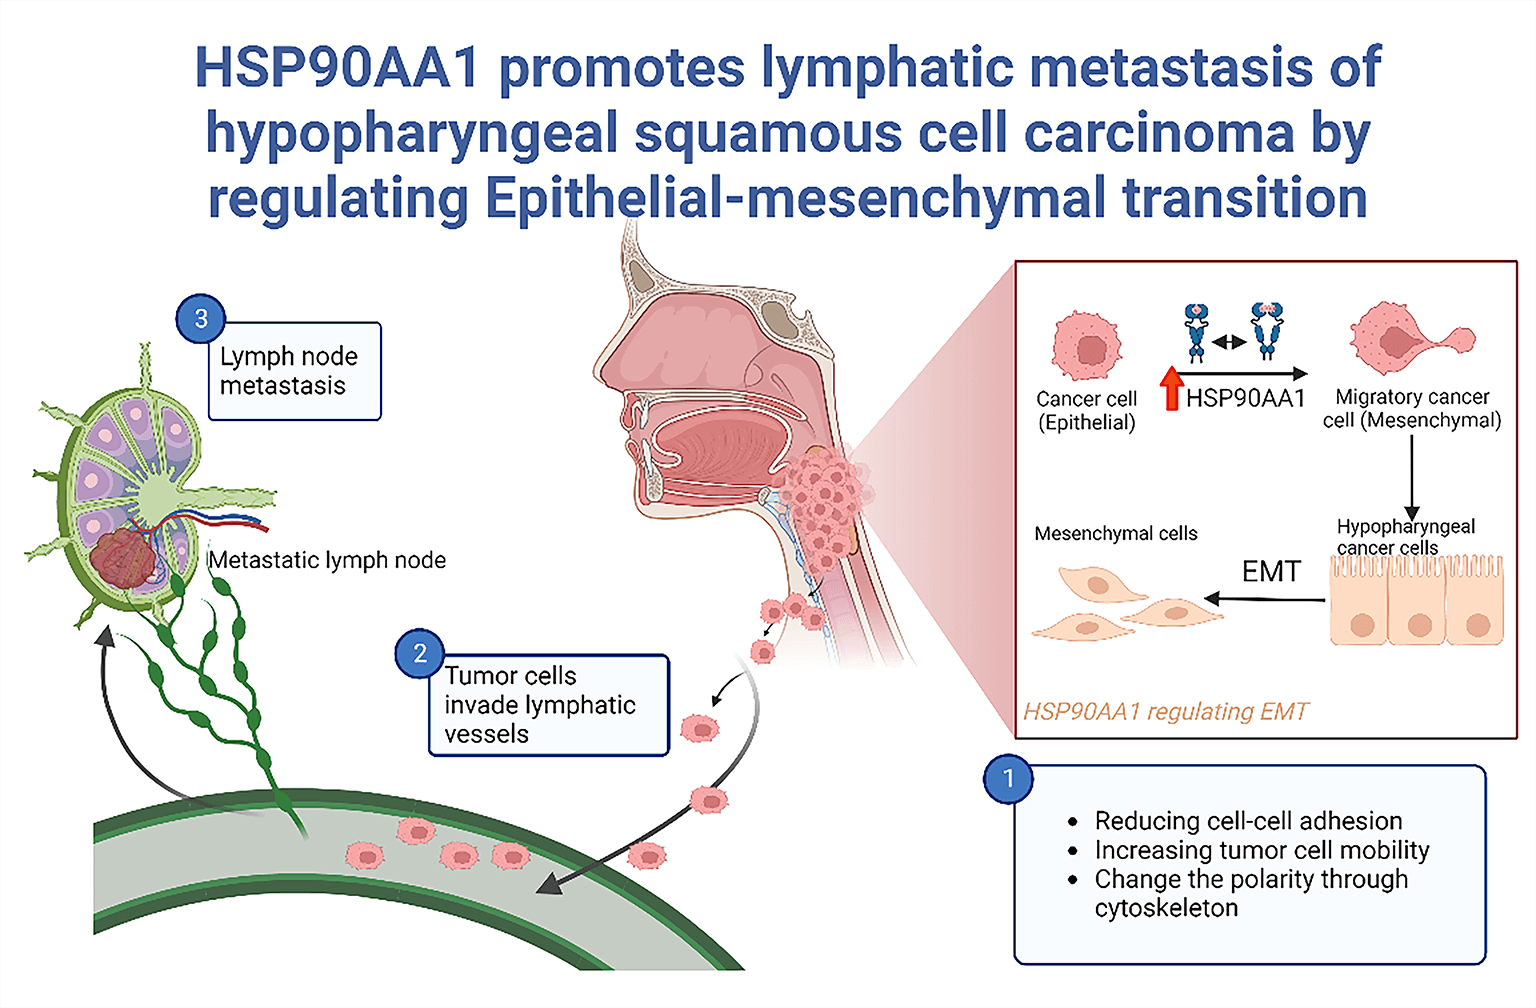 HSP90AA1 promotes lymphatic metastasis of hypopharyngeal squamous cell carcinoma by regulating epithelial-mesenchymal transition